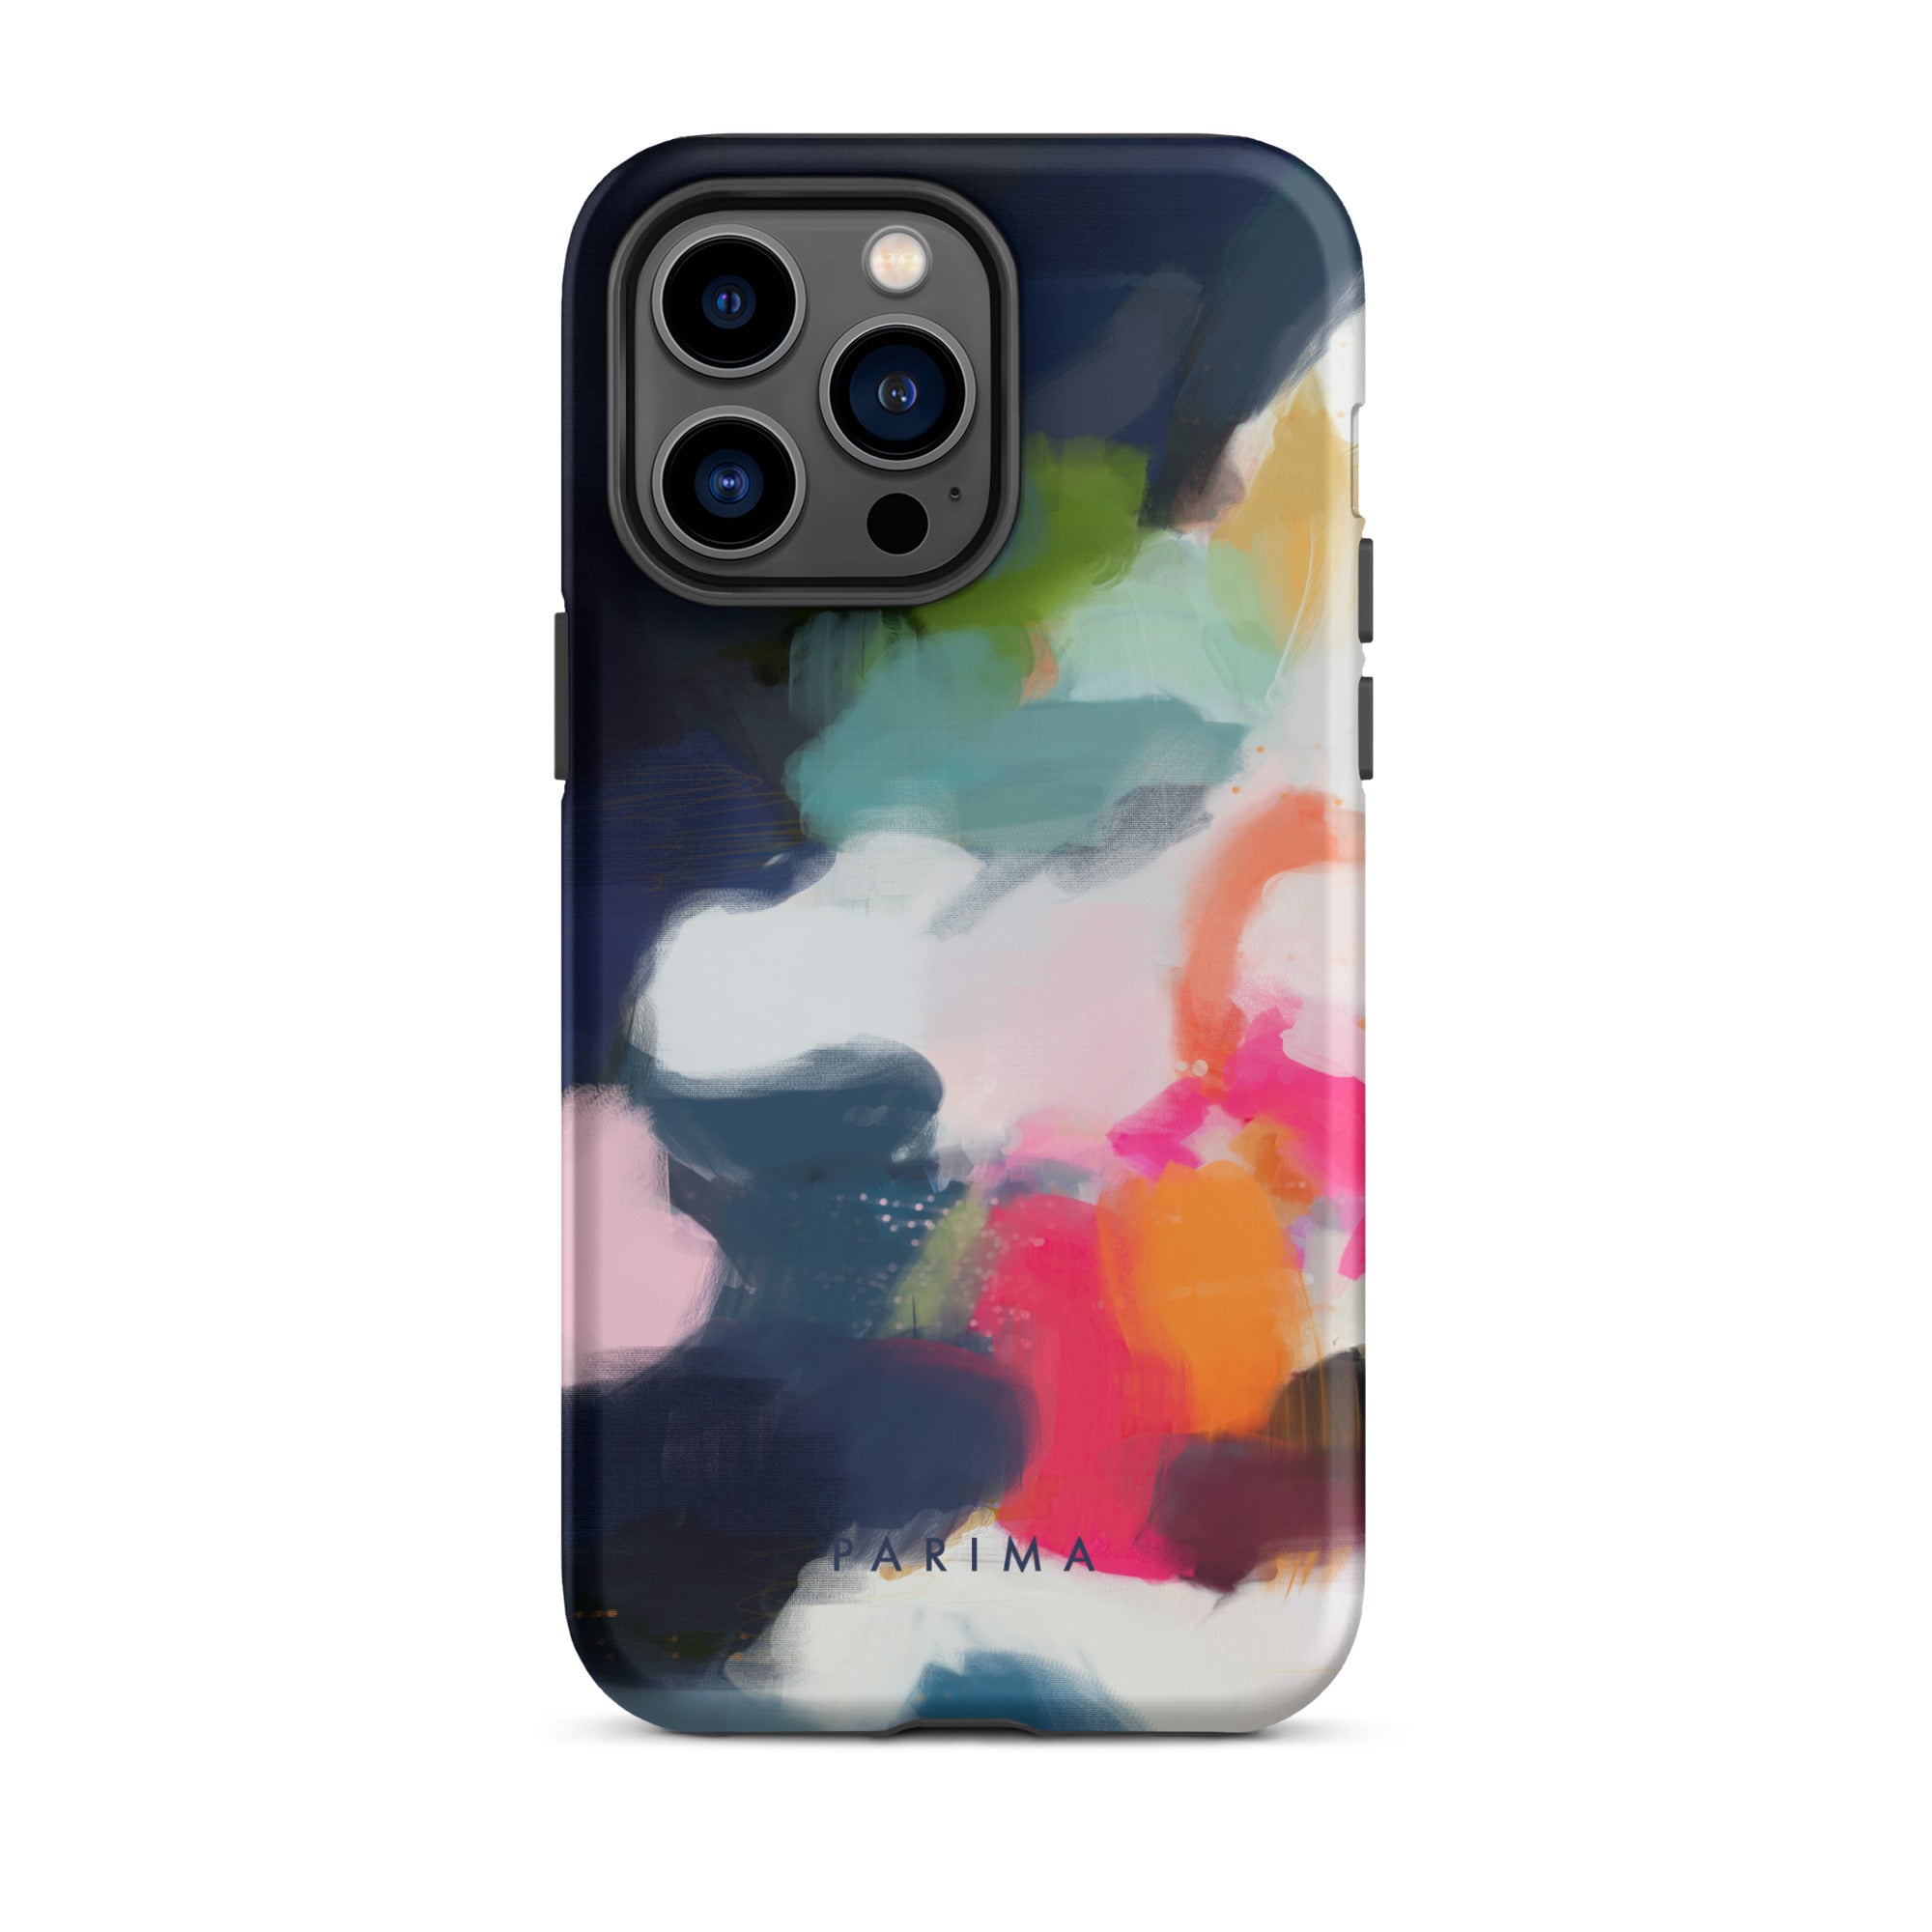 Eliza, pink and blue abstract art - iPhone 14 Pro Max tough case by Parima Studio